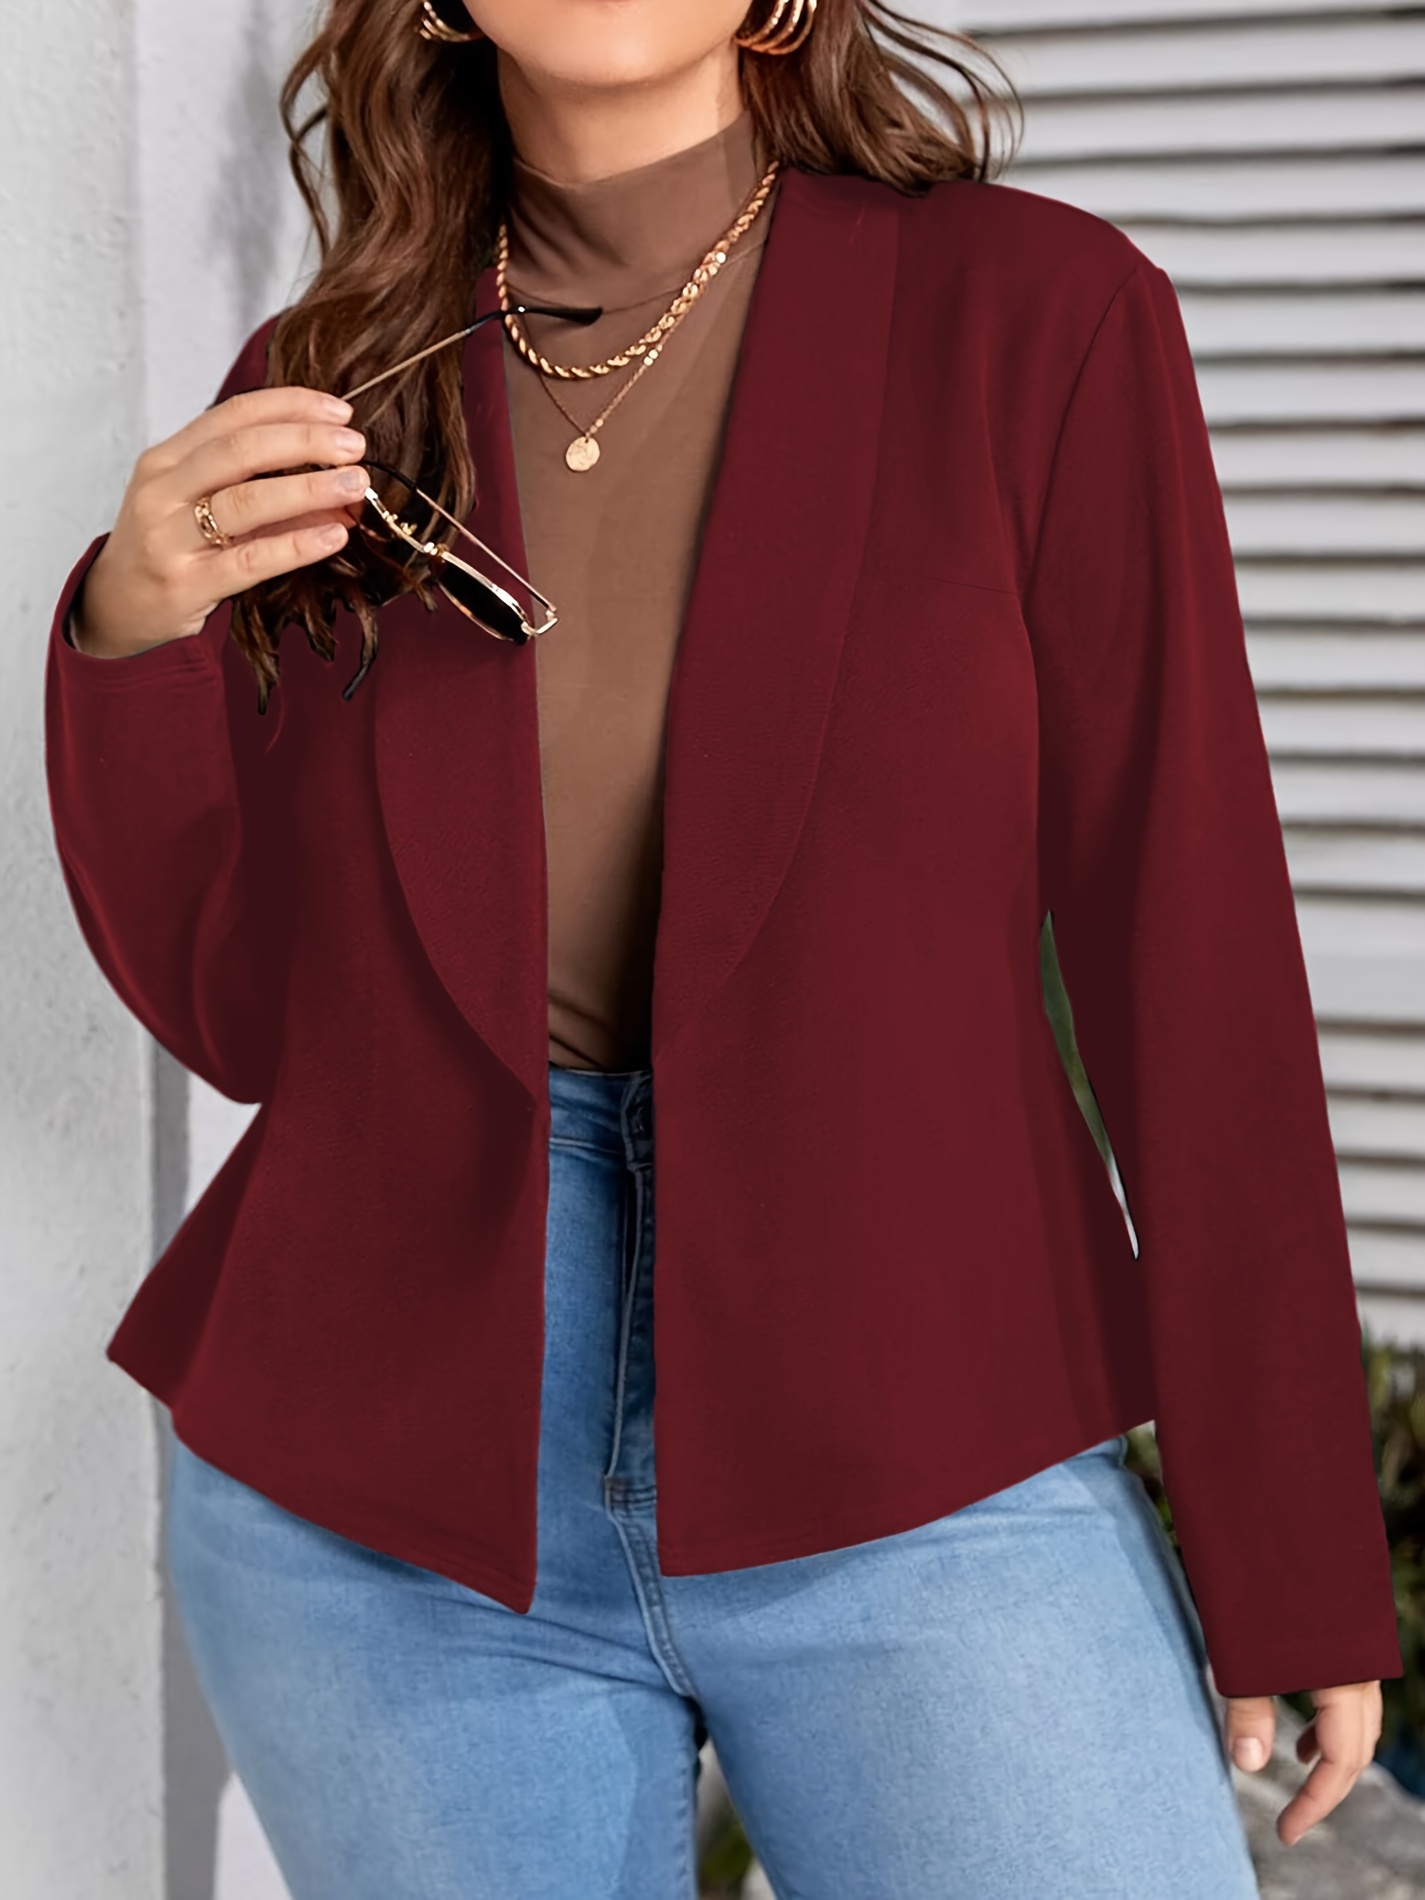 Lucky Red Single Breasted Notch Lapel Business Formal PantSuits Women Full  Sleeve Jacket+Pants Suit Female Pantsuit Plus Size From Dunhuang555, $86.12